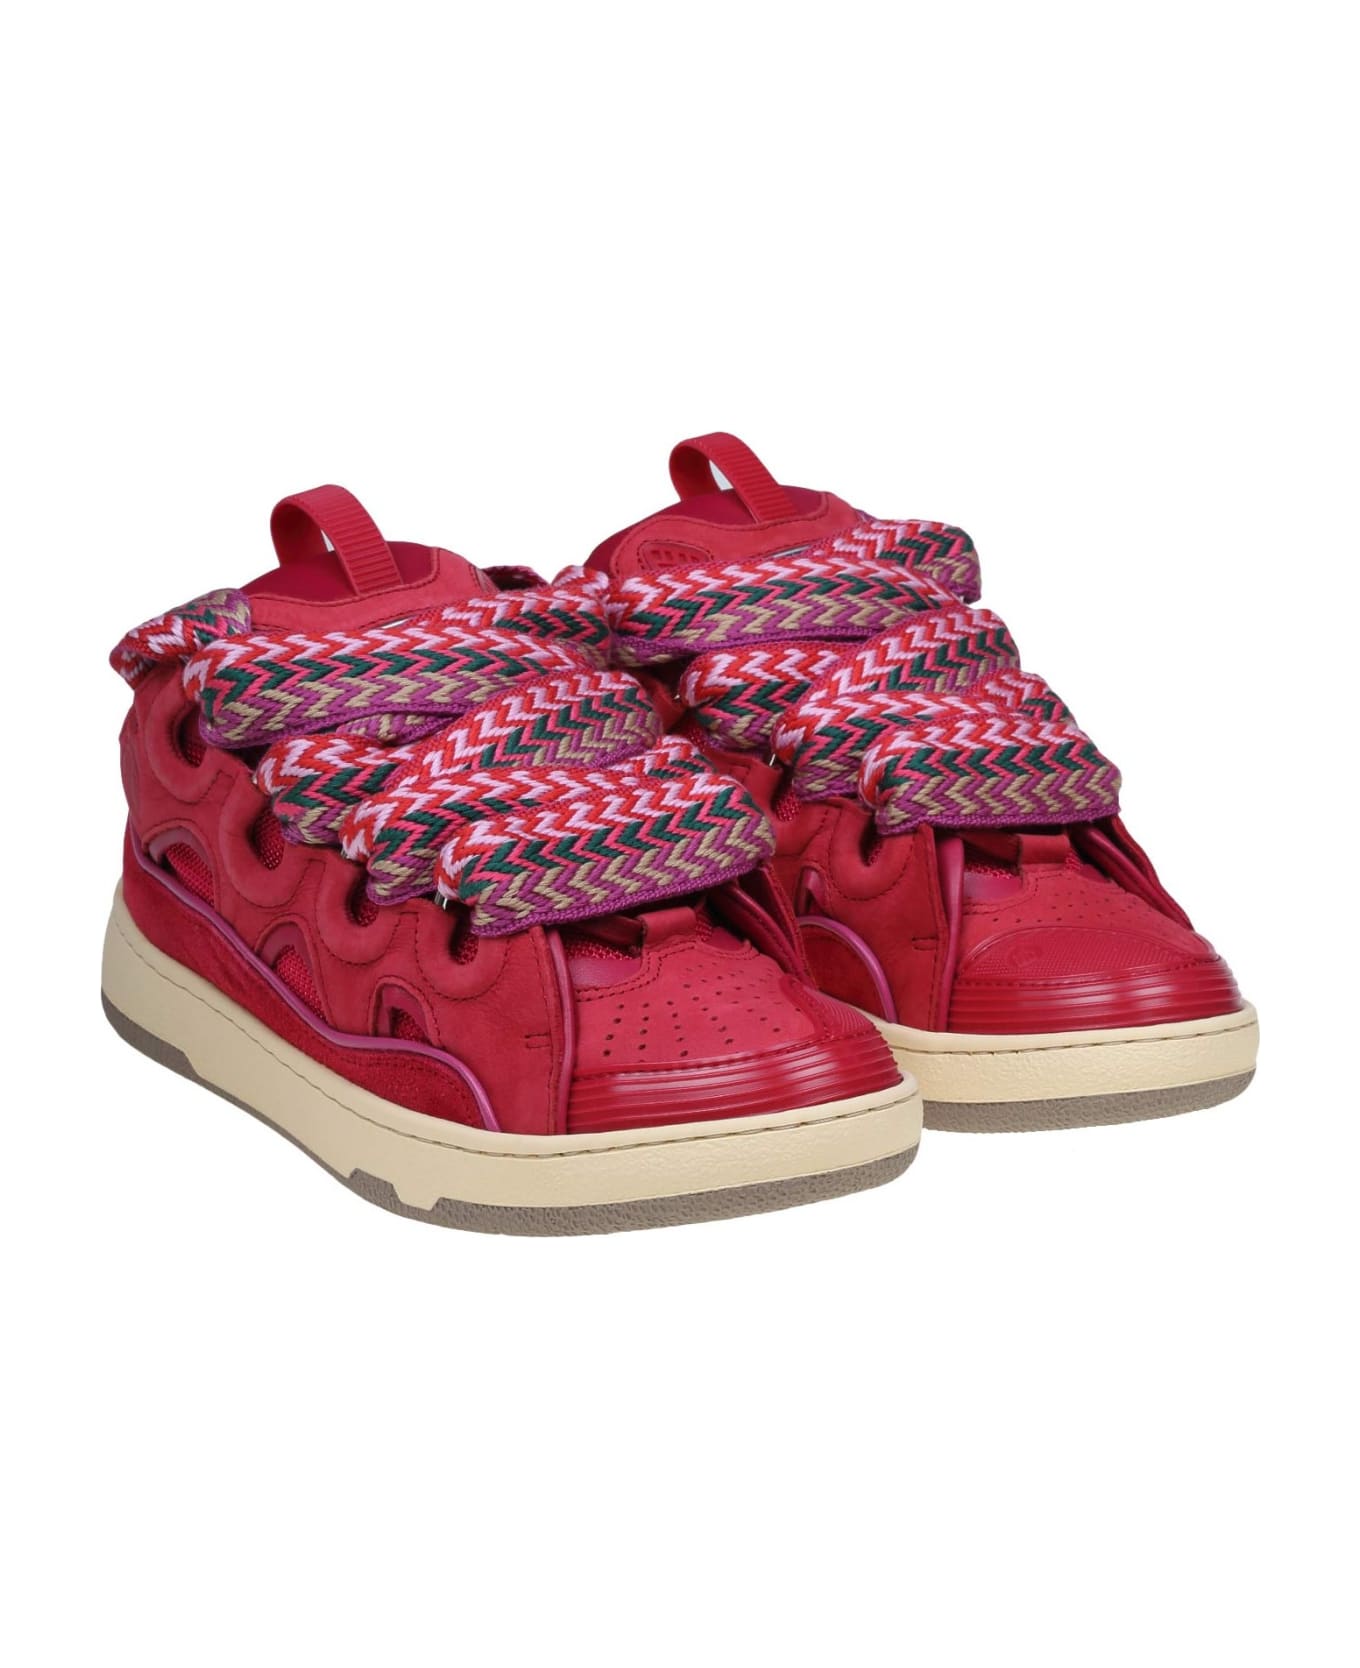 Lanvin Curb Sneakers In Suede And Watermelon Color Fabric - Watermelon スニーカー